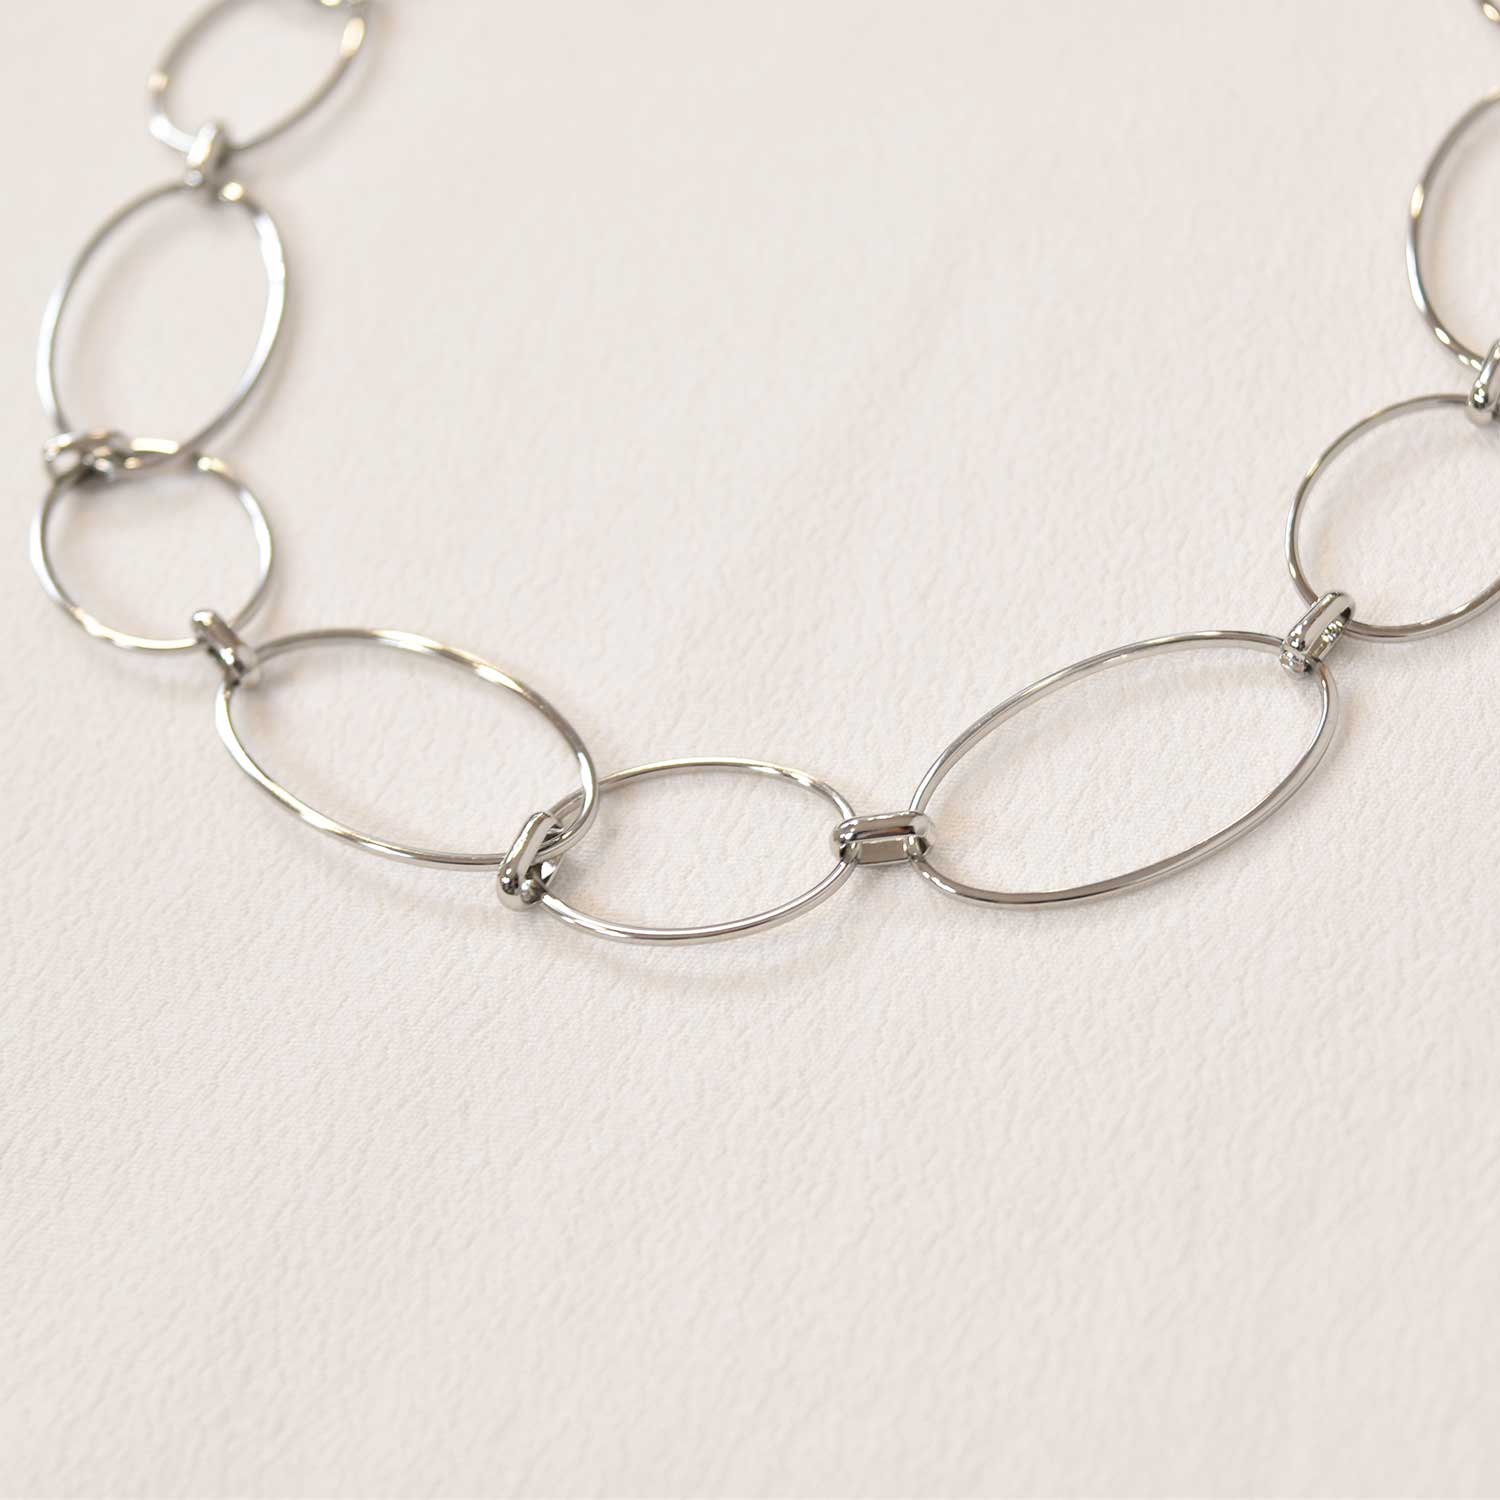 Silver oval necklace